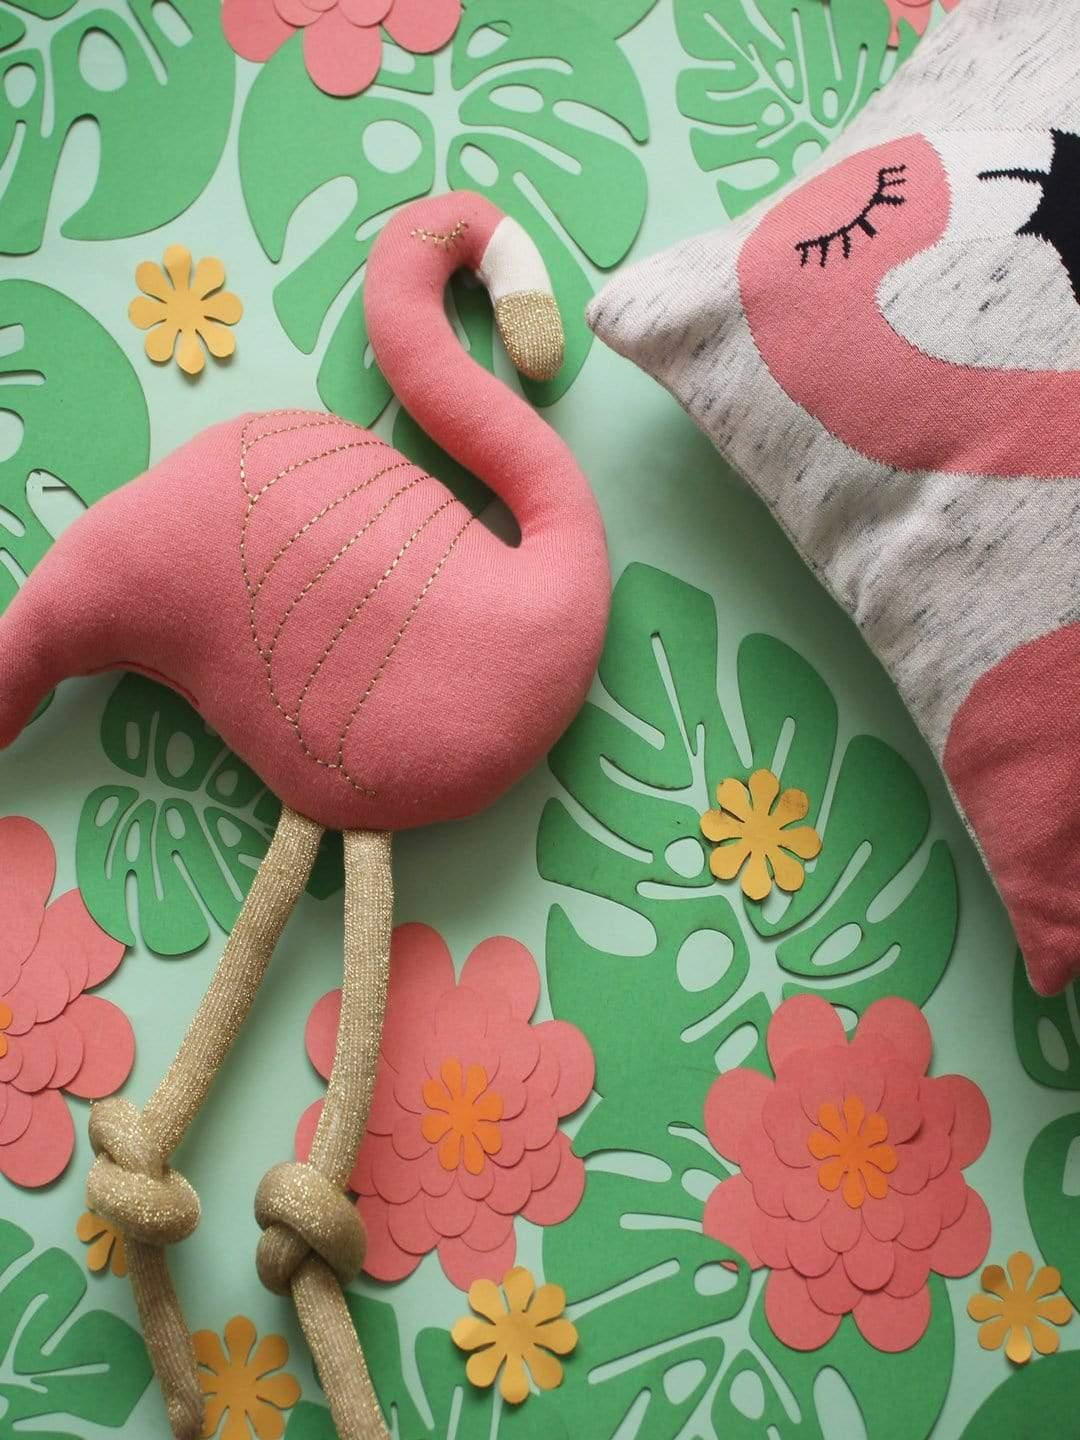 Flamingo Knitted Cotton Cushion CoverMaterial:

97% Cotton 
3% lurex - Knitted Cotton

Dimensions:

35 cm x 35 cm, Width - 0.2 Cm
 Weight- 145 Grams 
Flamingo Knitted Cotton Cushion CoverThe Wishing Chair